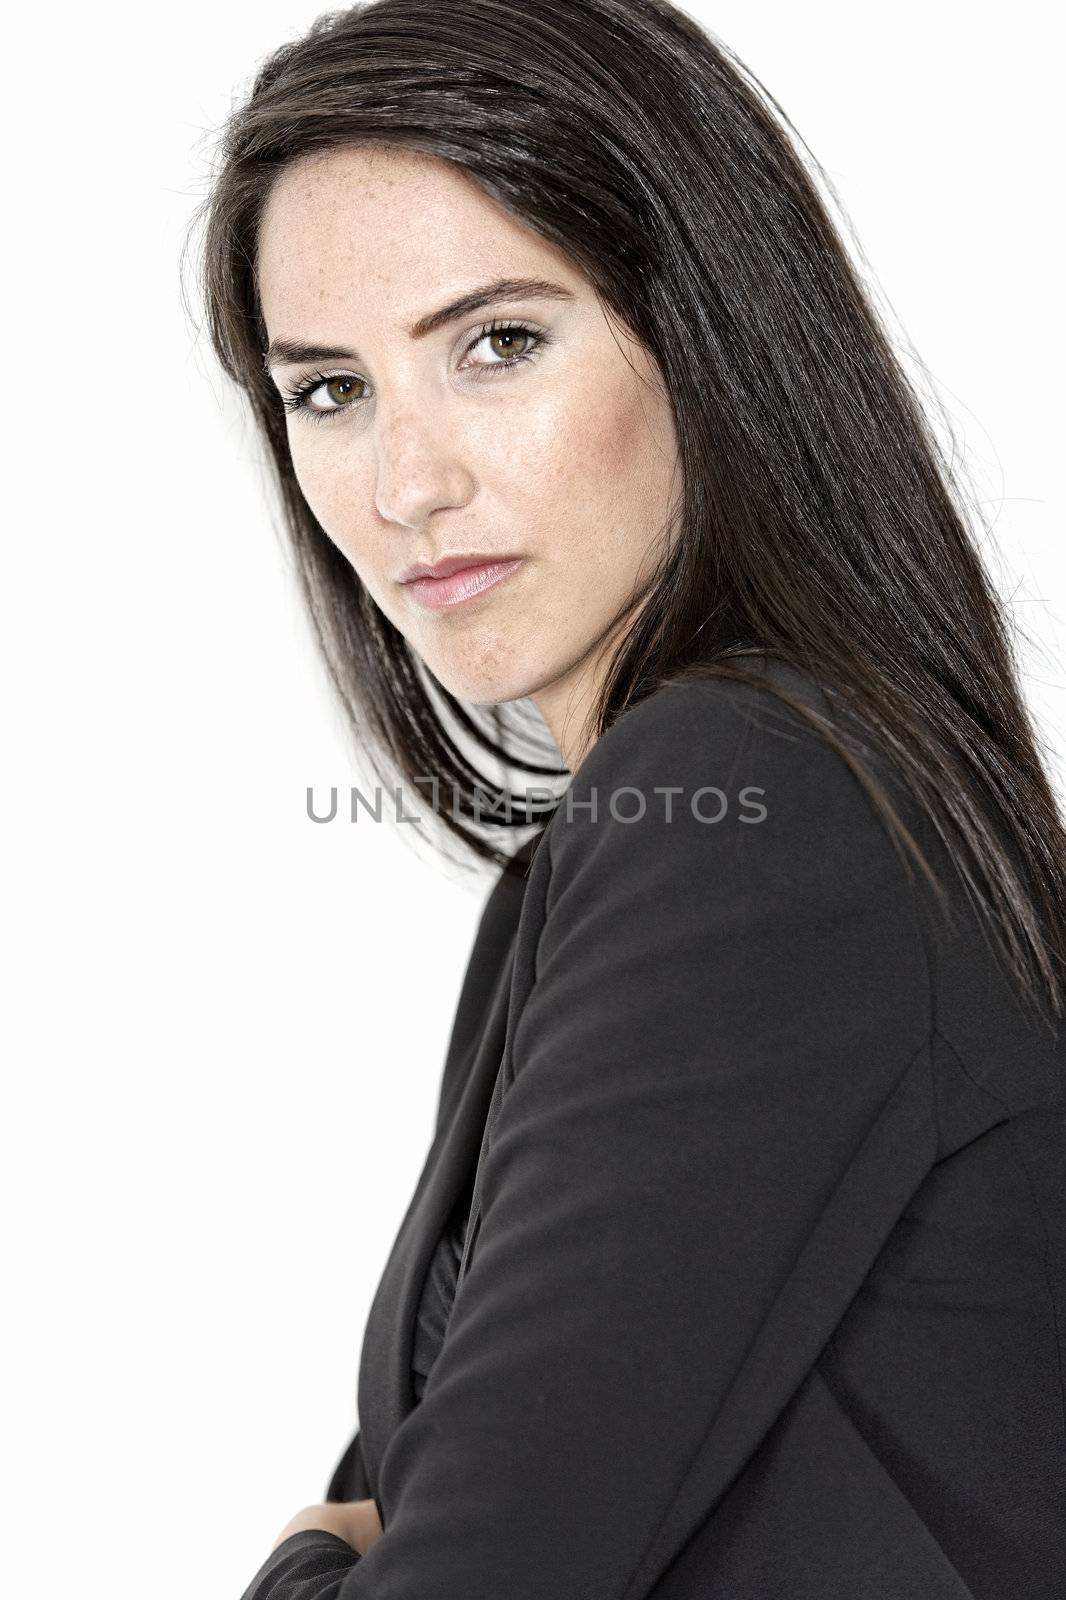 Professional working woman in corporate business clothes with a serious look